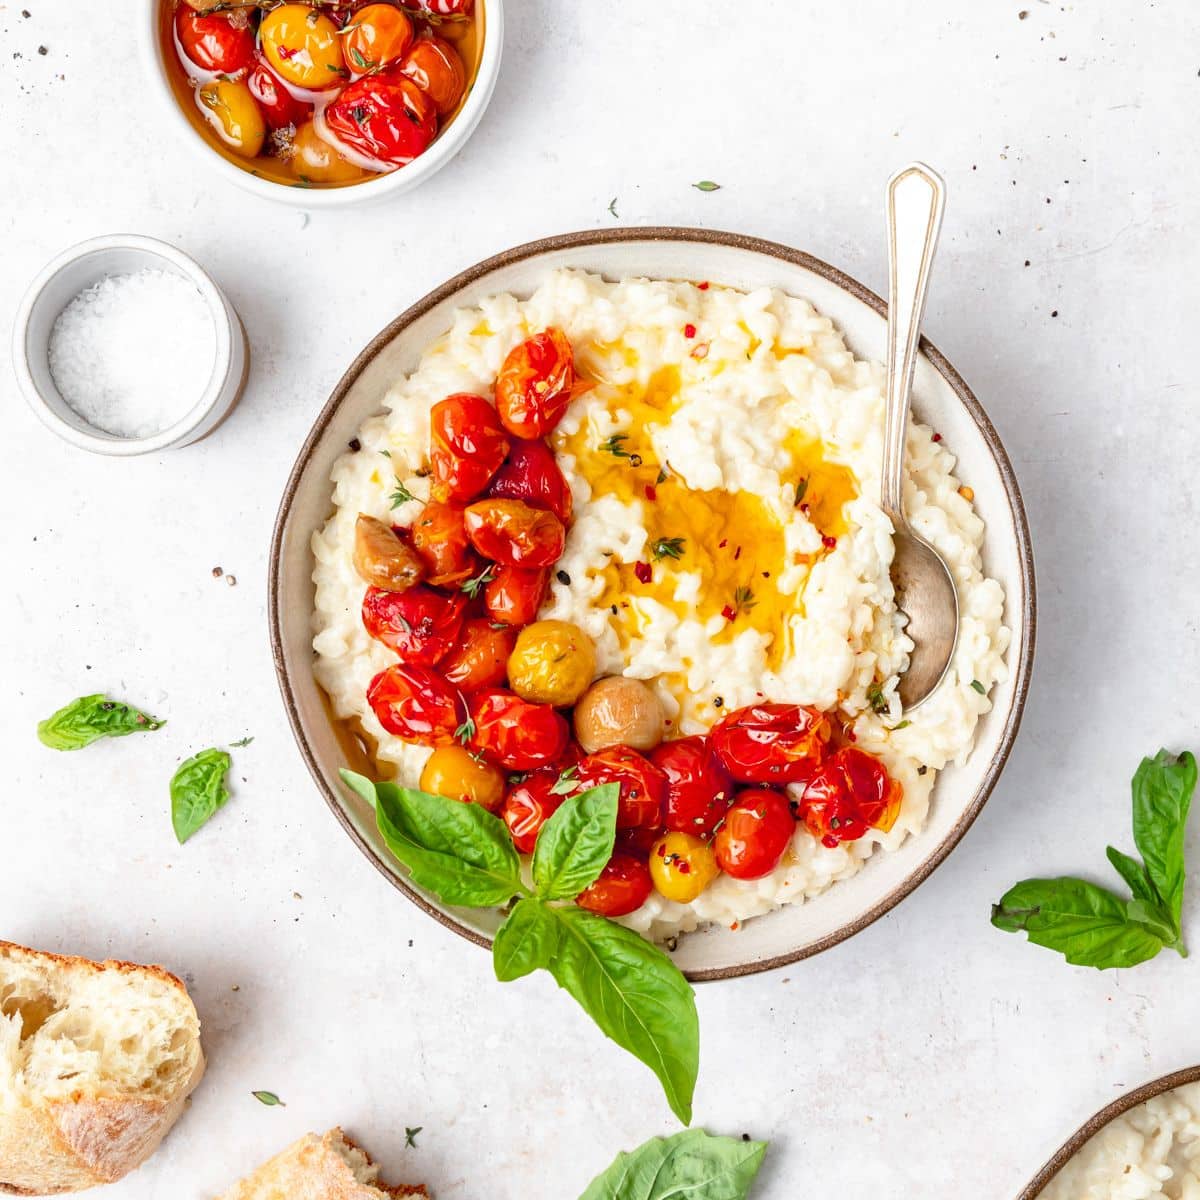 A bowl of hummus with tomatoes and basil.